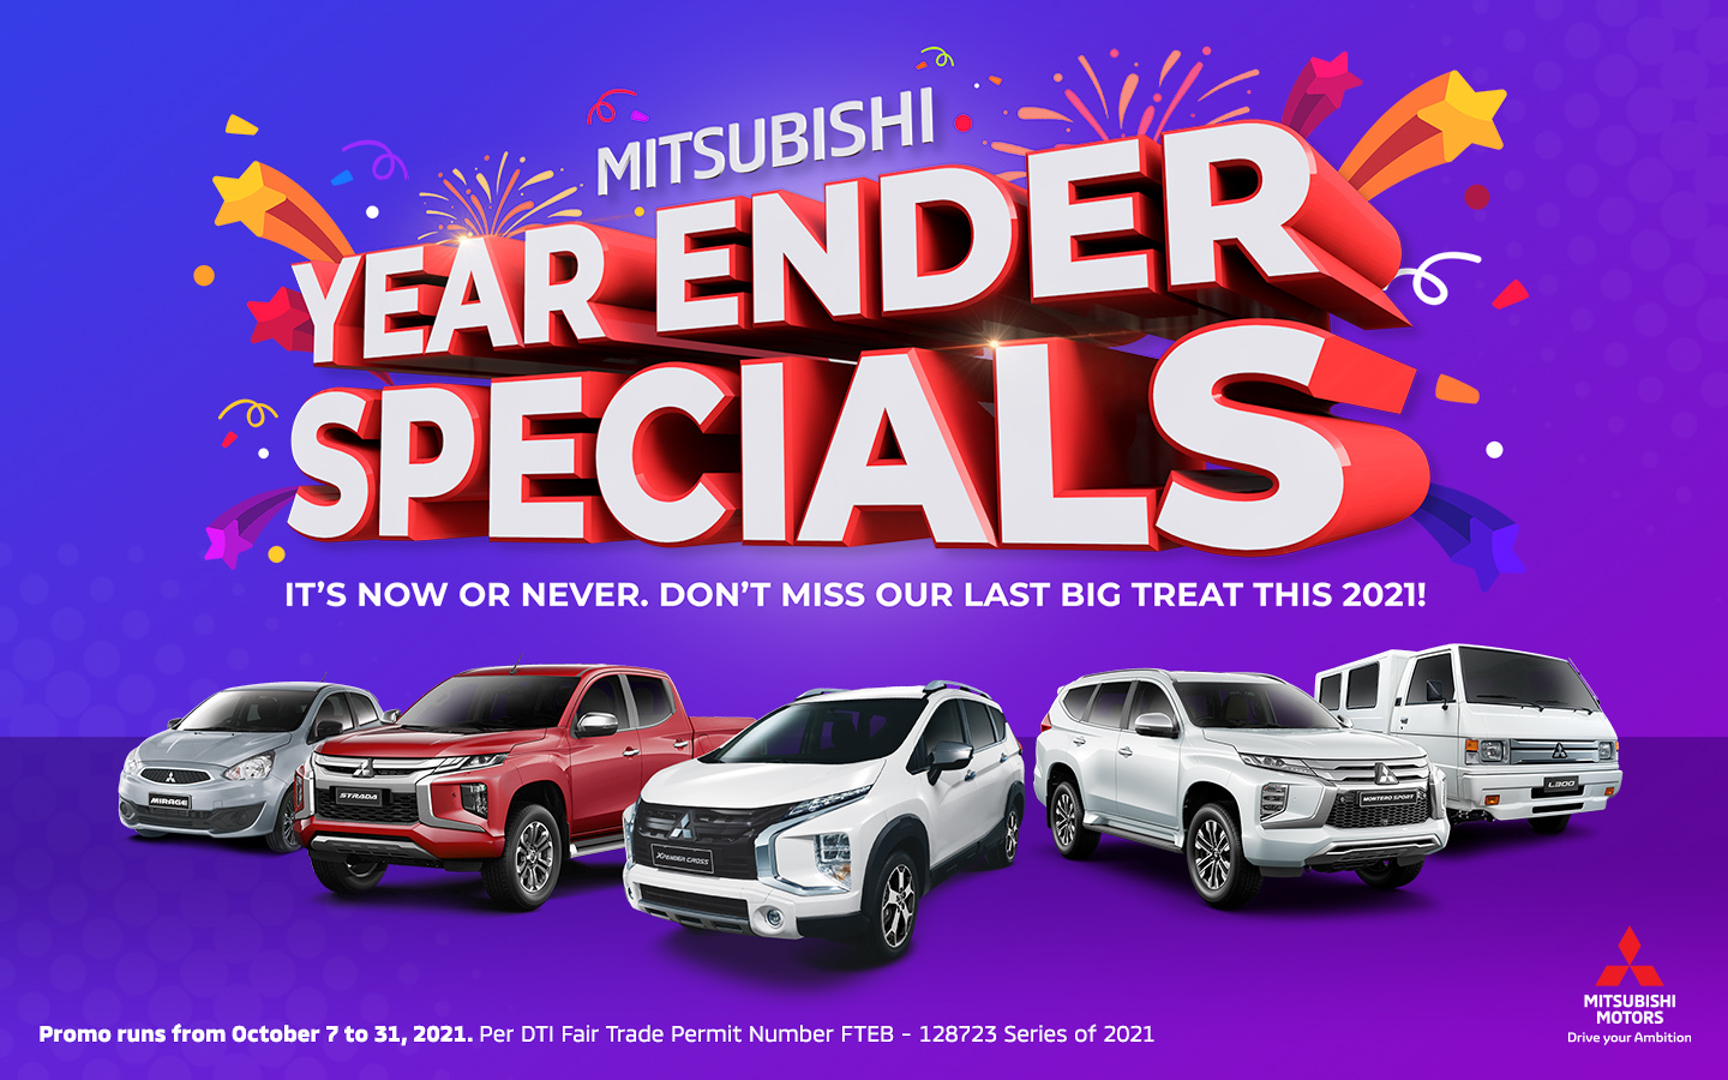 Mitsubishi offers amazing all-in deals through its Year Ender Specials promo